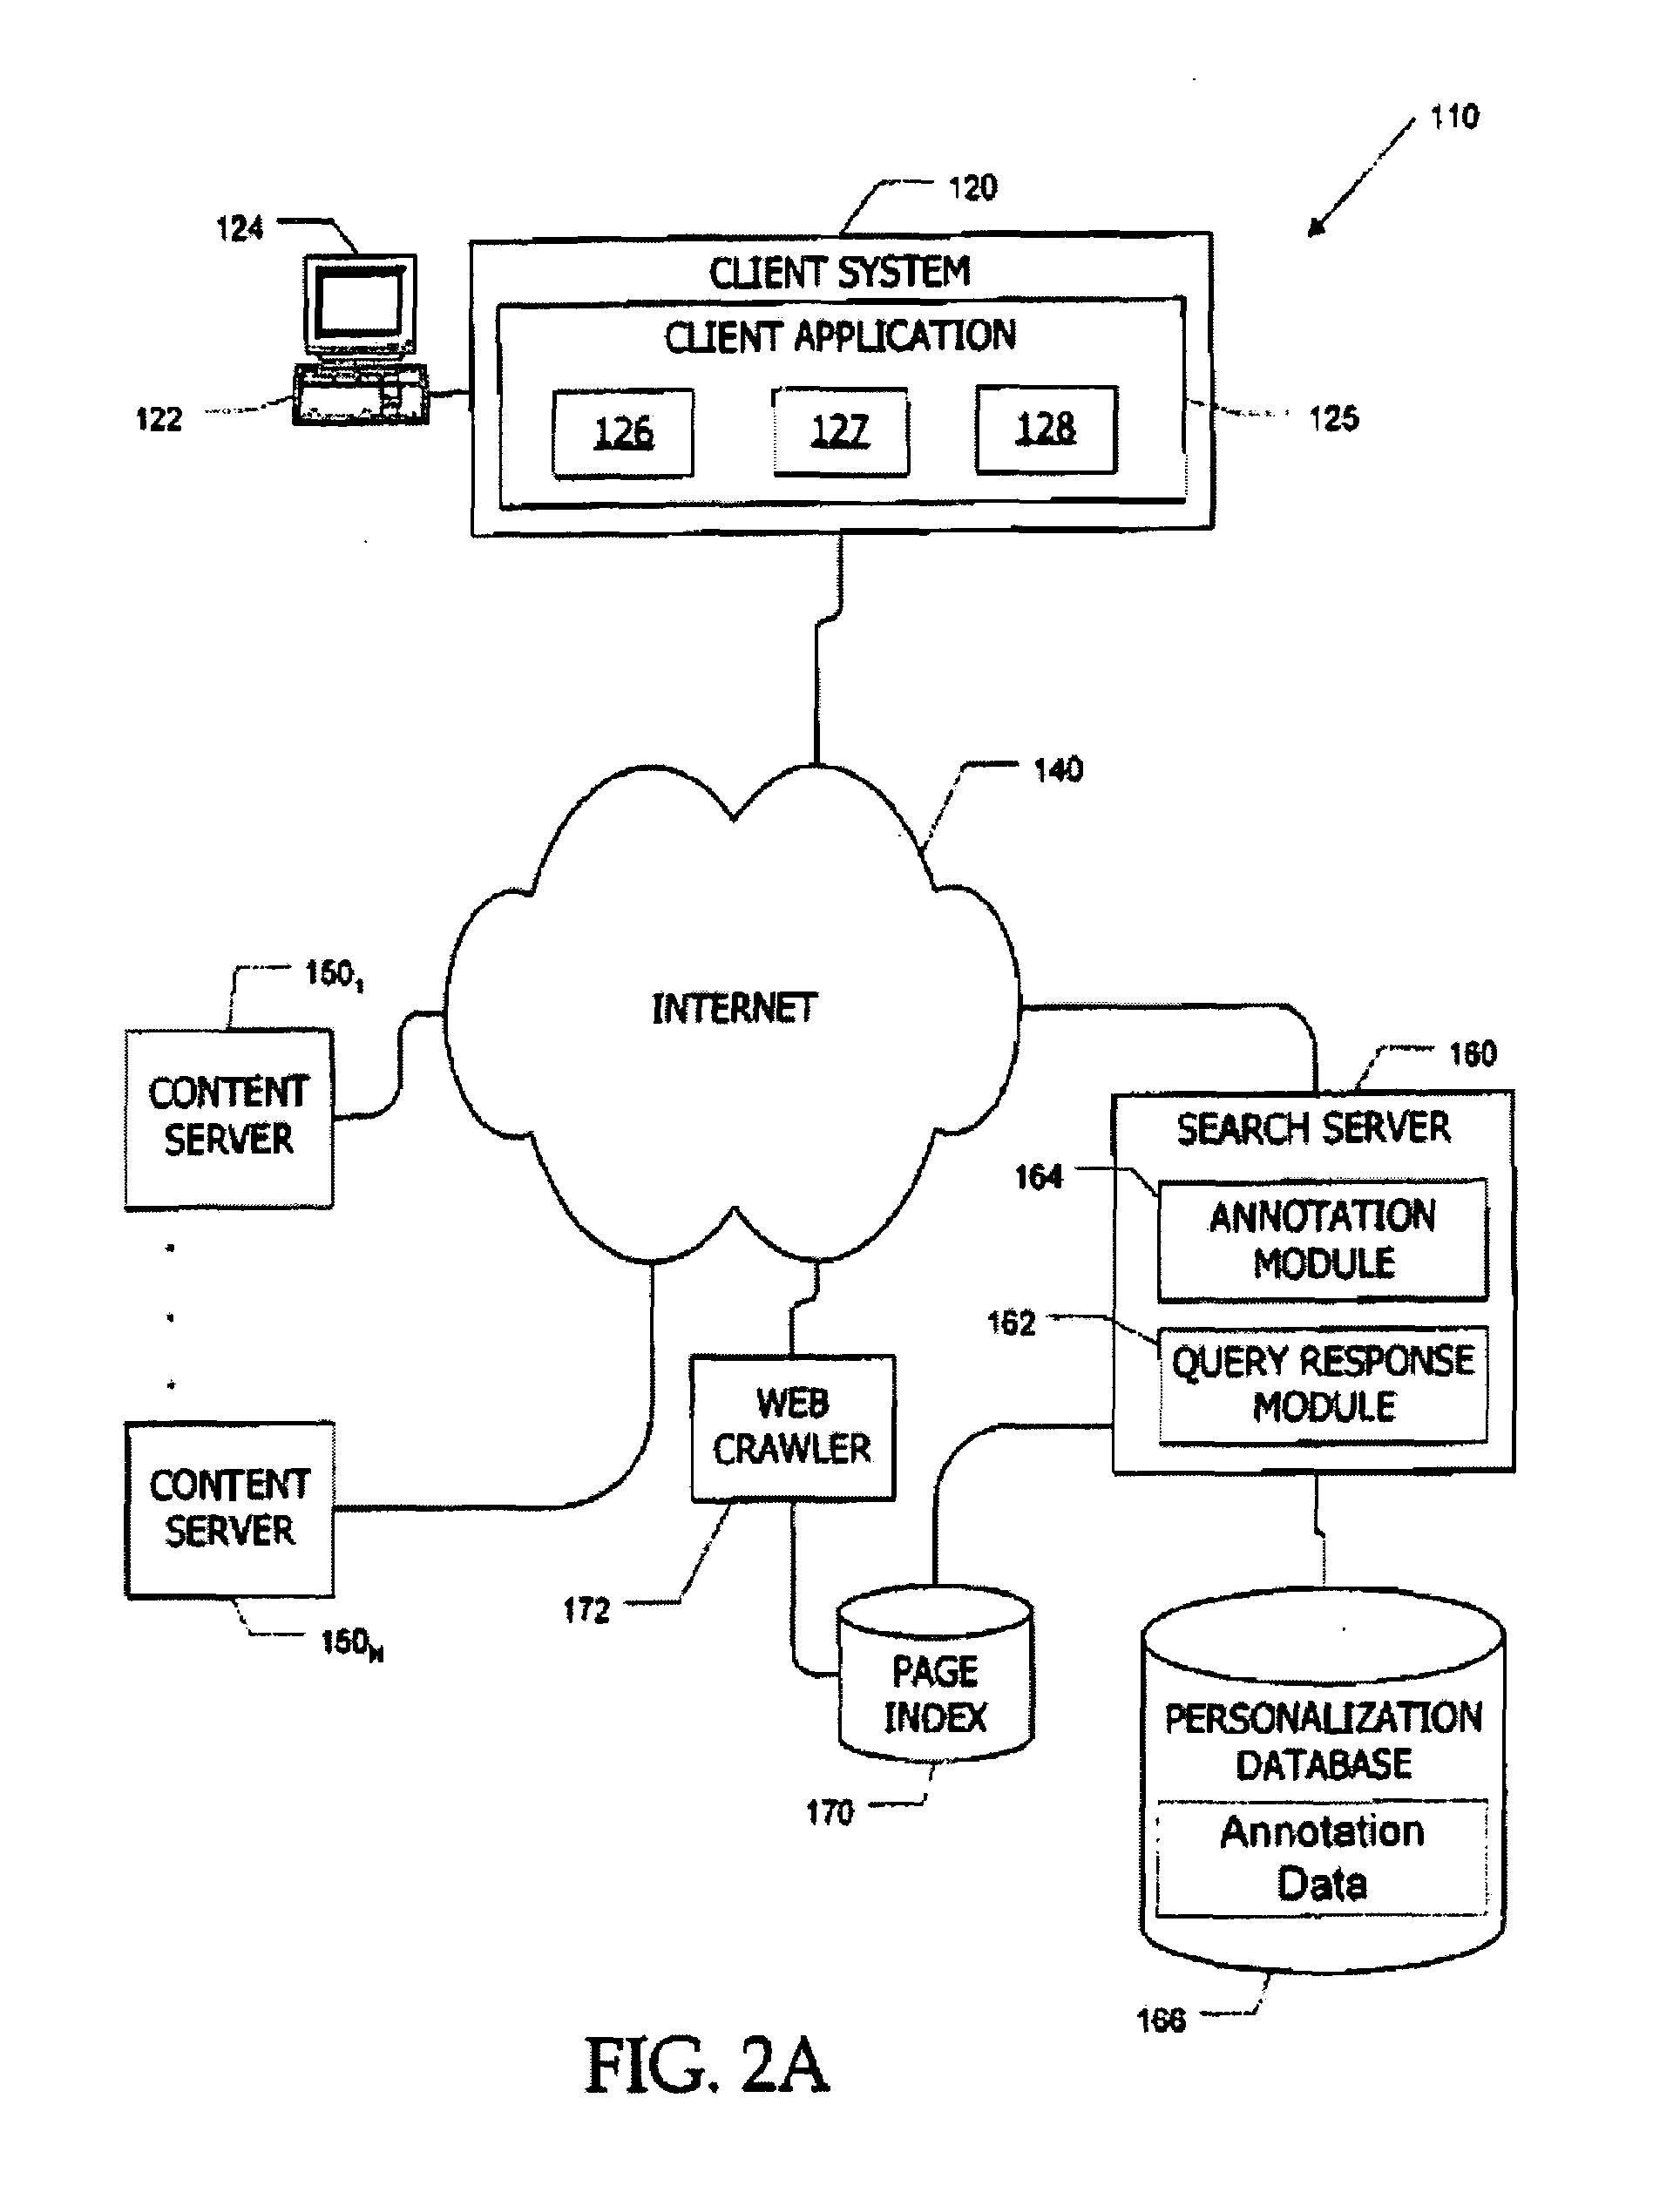 Apparatus and method for controlling content access based on shared annotations for annotated users in a folksonomy scheme